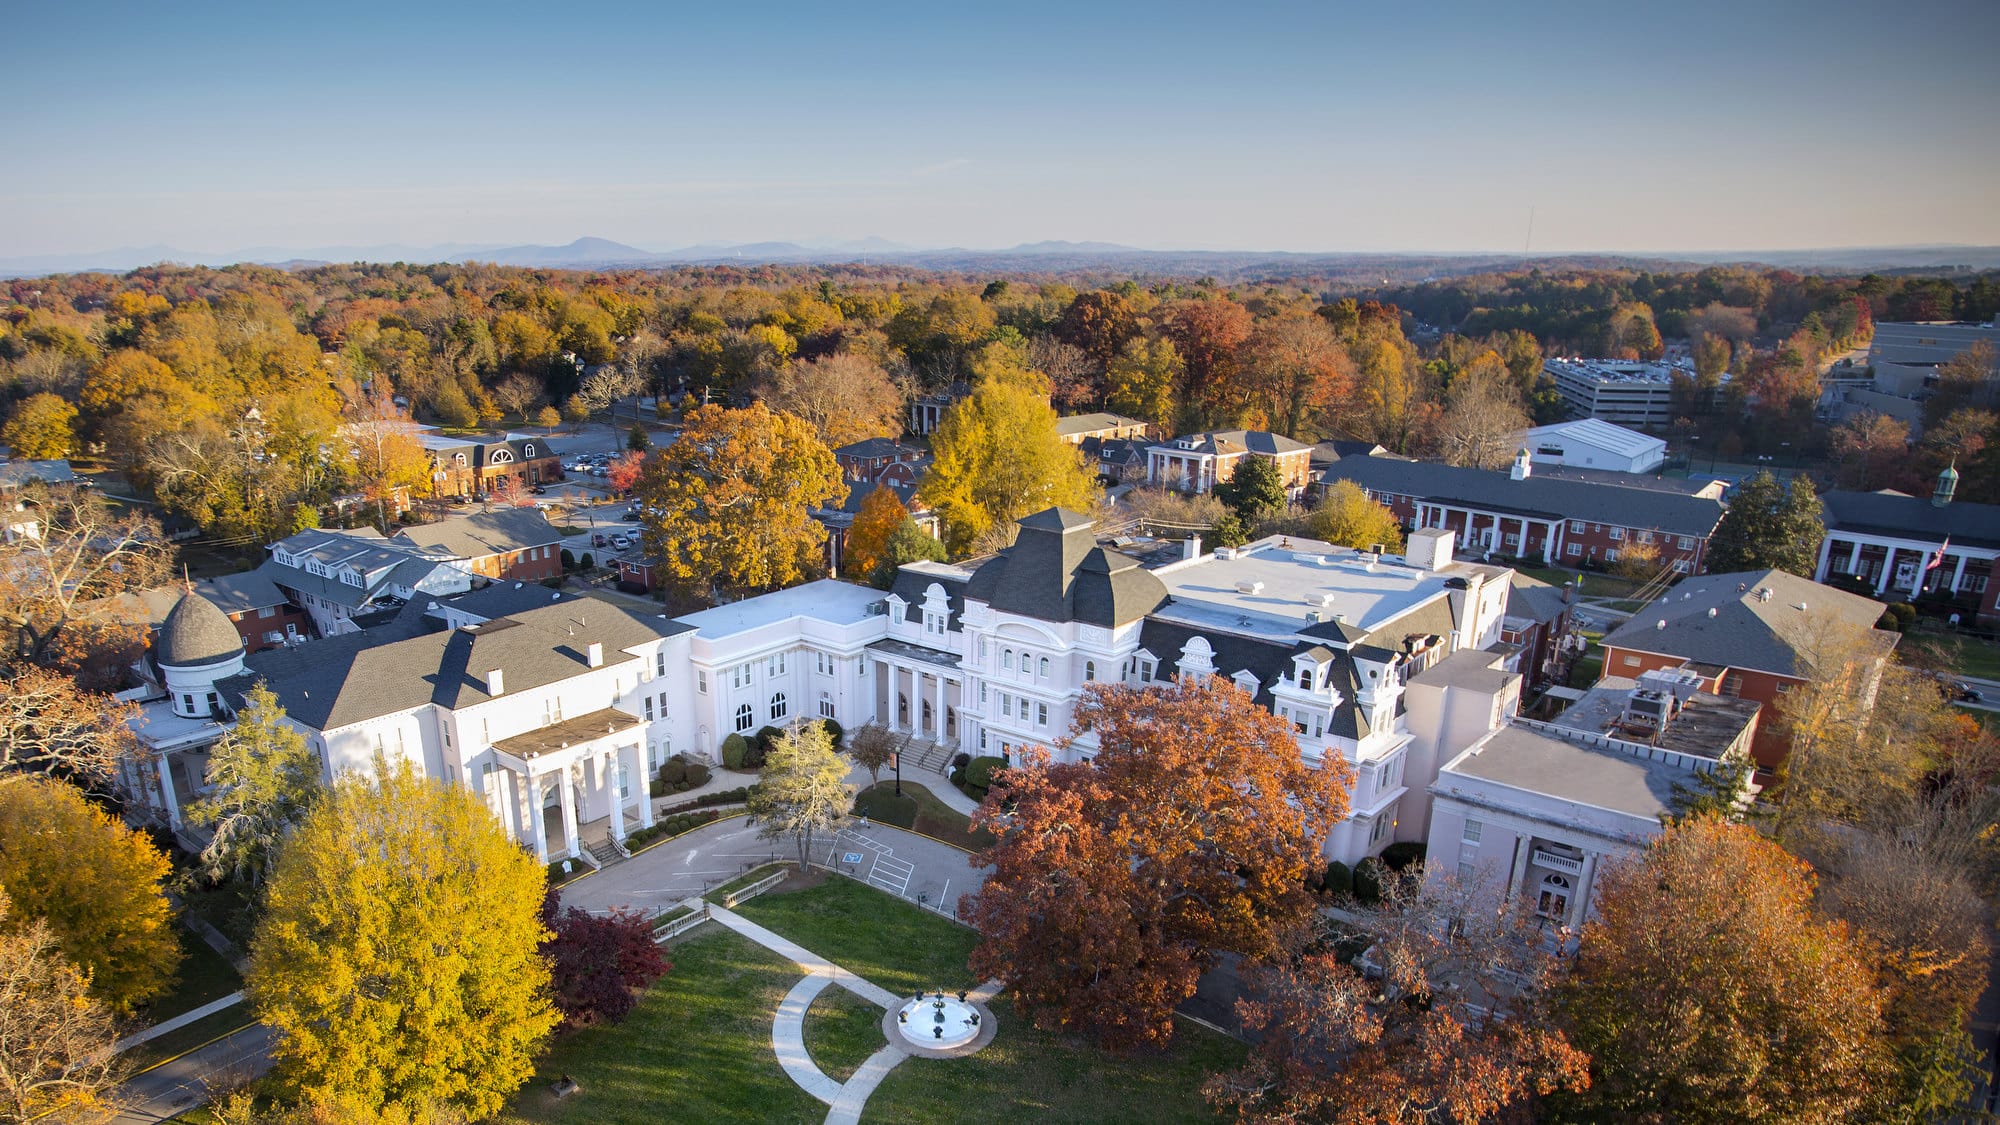 An aerial view of the historic Gainesville campus